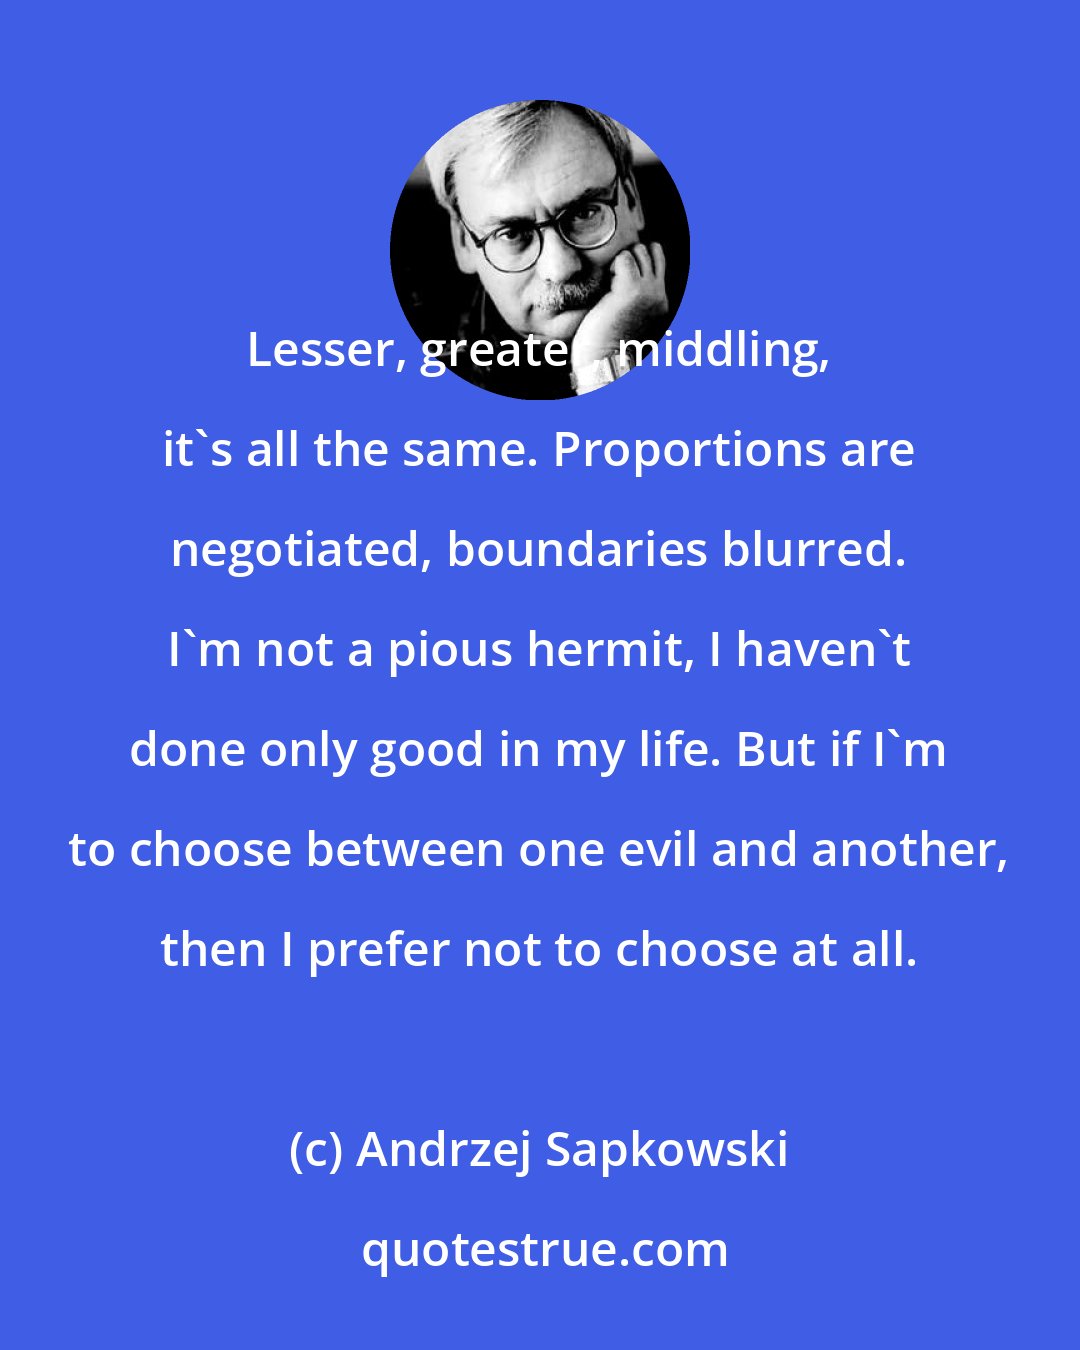 Andrzej Sapkowski: Lesser, greater, middling, it's all the same. Proportions are negotiated, boundaries blurred. I'm not a pious hermit, I haven't done only good in my life. But if I'm to choose between one evil and another, then I prefer not to choose at all.